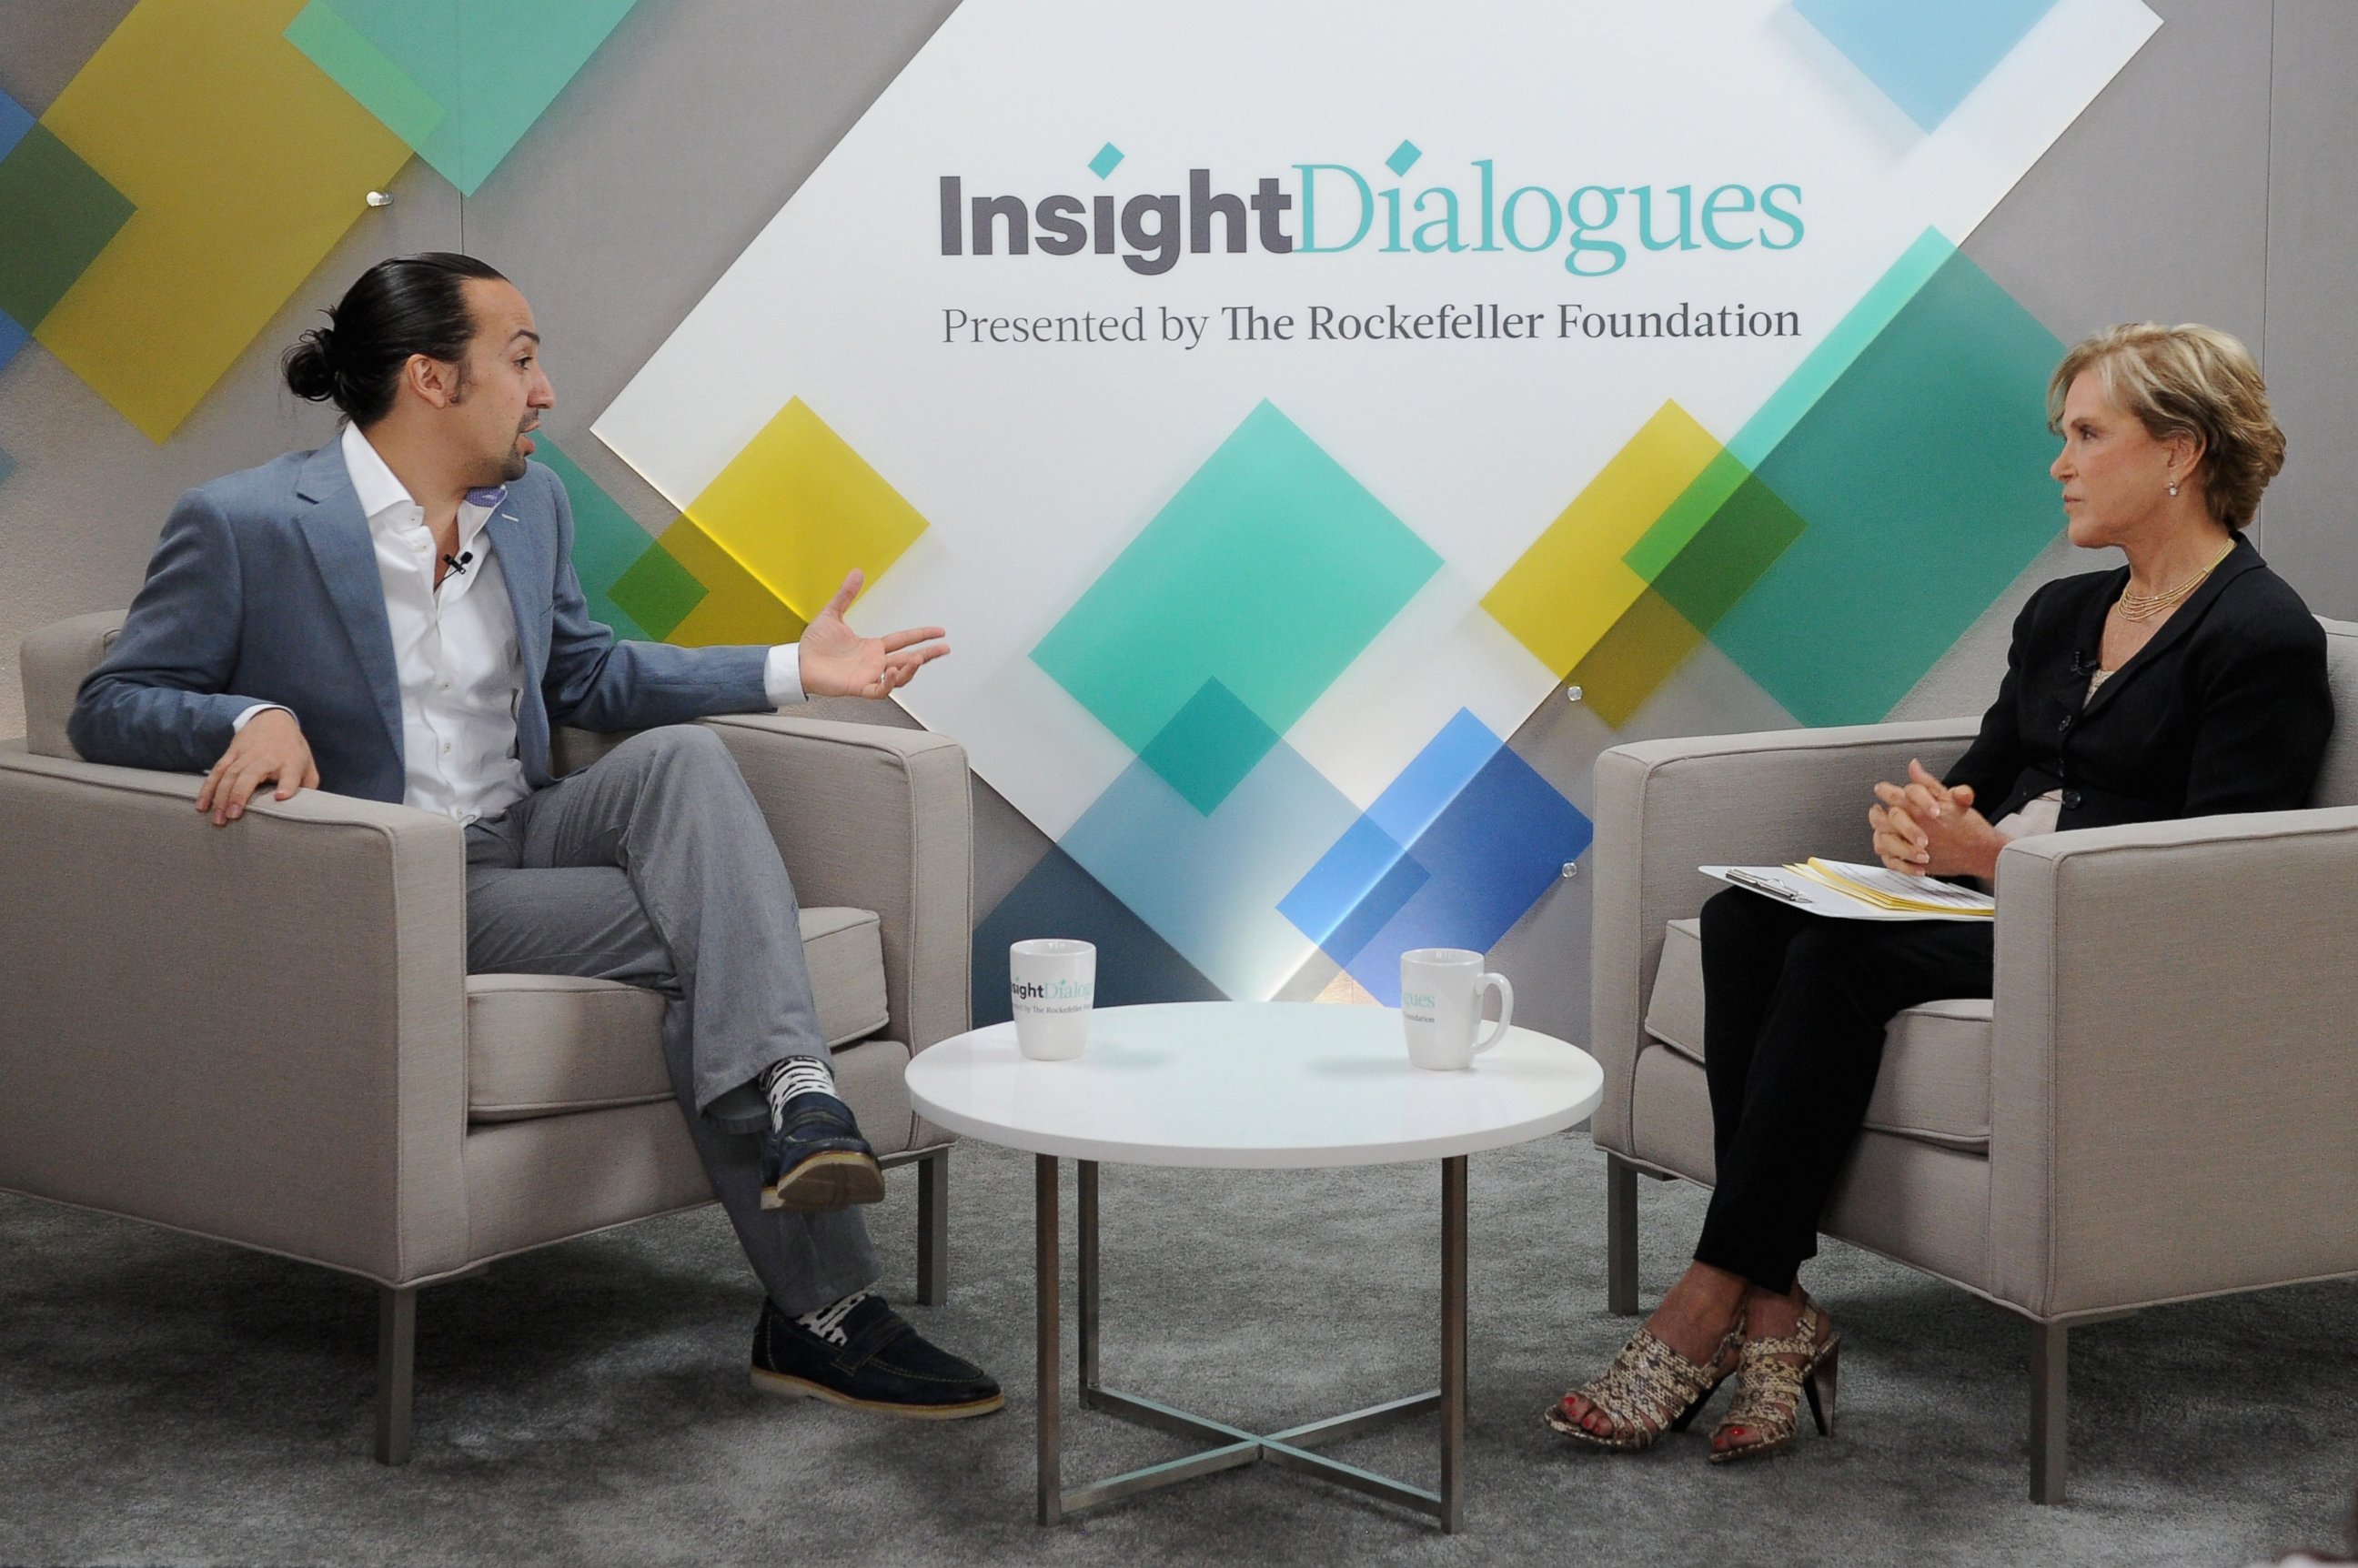 PHOTO: Lin-Manuel Miranda and Judith Rodin speak at Insight Dialogues Presented by The Rockefeller Foundation, on June 23, 2016 in New York City.